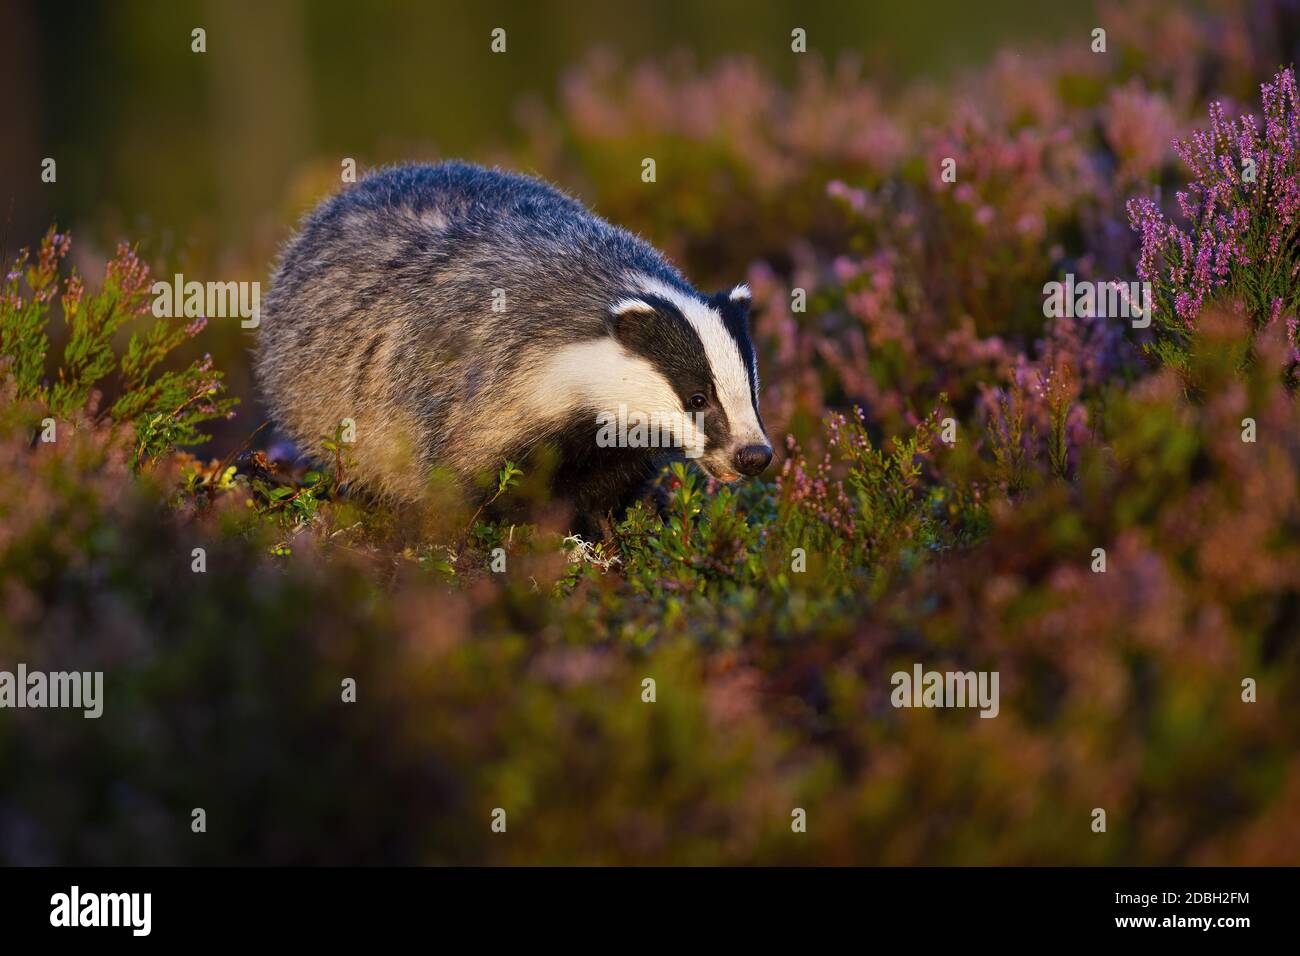 Curious european badger, meles meles, approaching from front view on moorland with common heather, calluna vulgaris, bushes. Animal wildlife in nature Stock Photo